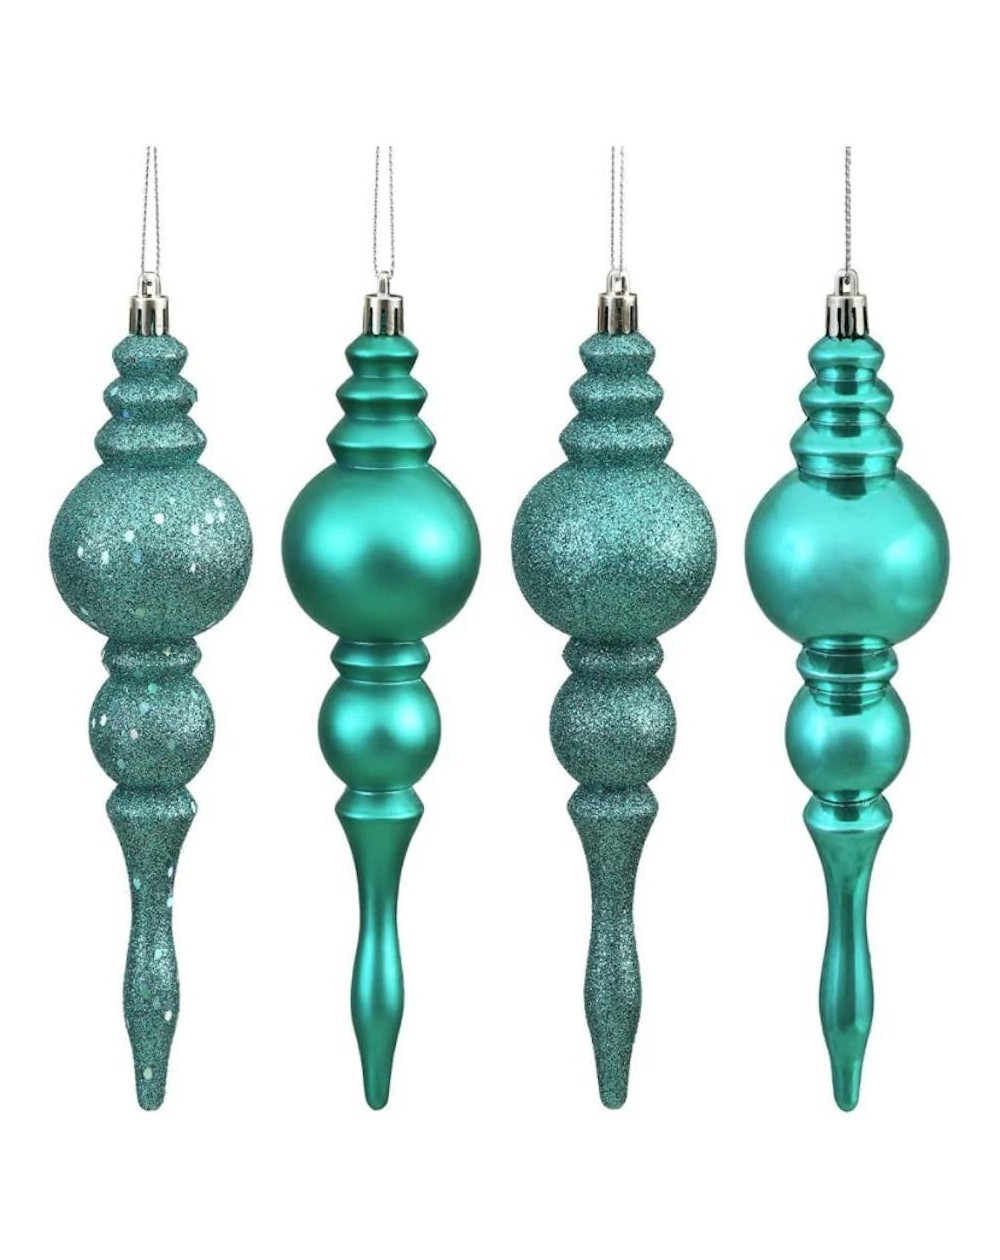 Ornaments 7" Teal 4 Assorted Finish Finial Christmas Tree Ornament (8 pack) (N500242) - CQ18DT4W3I2 $19.39